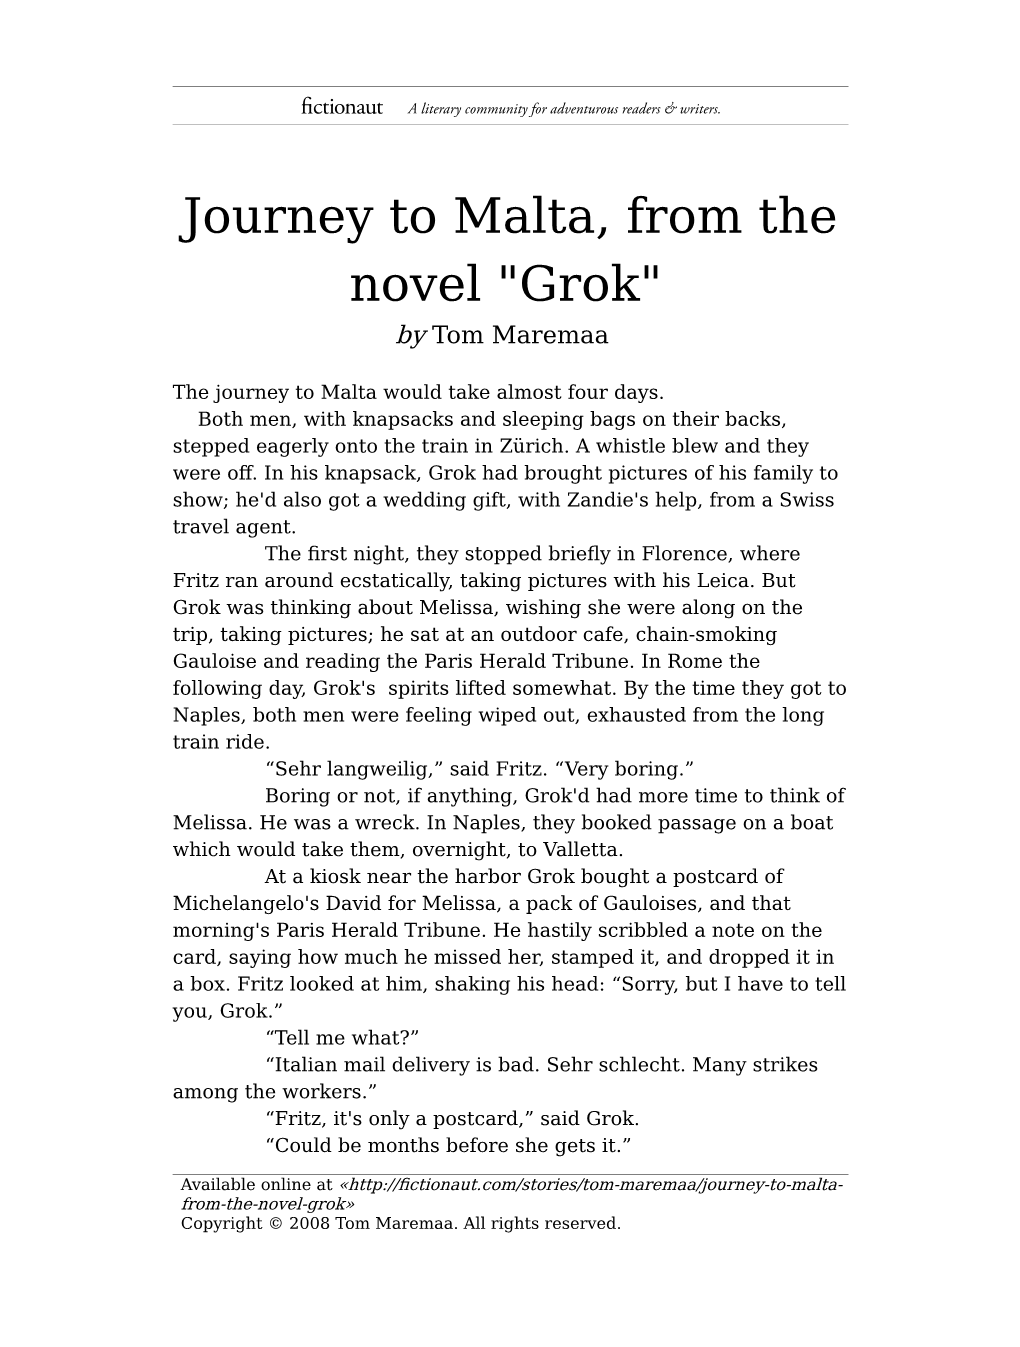 Journey to Malta, from the Novel "Grok" by Tom Maremaa